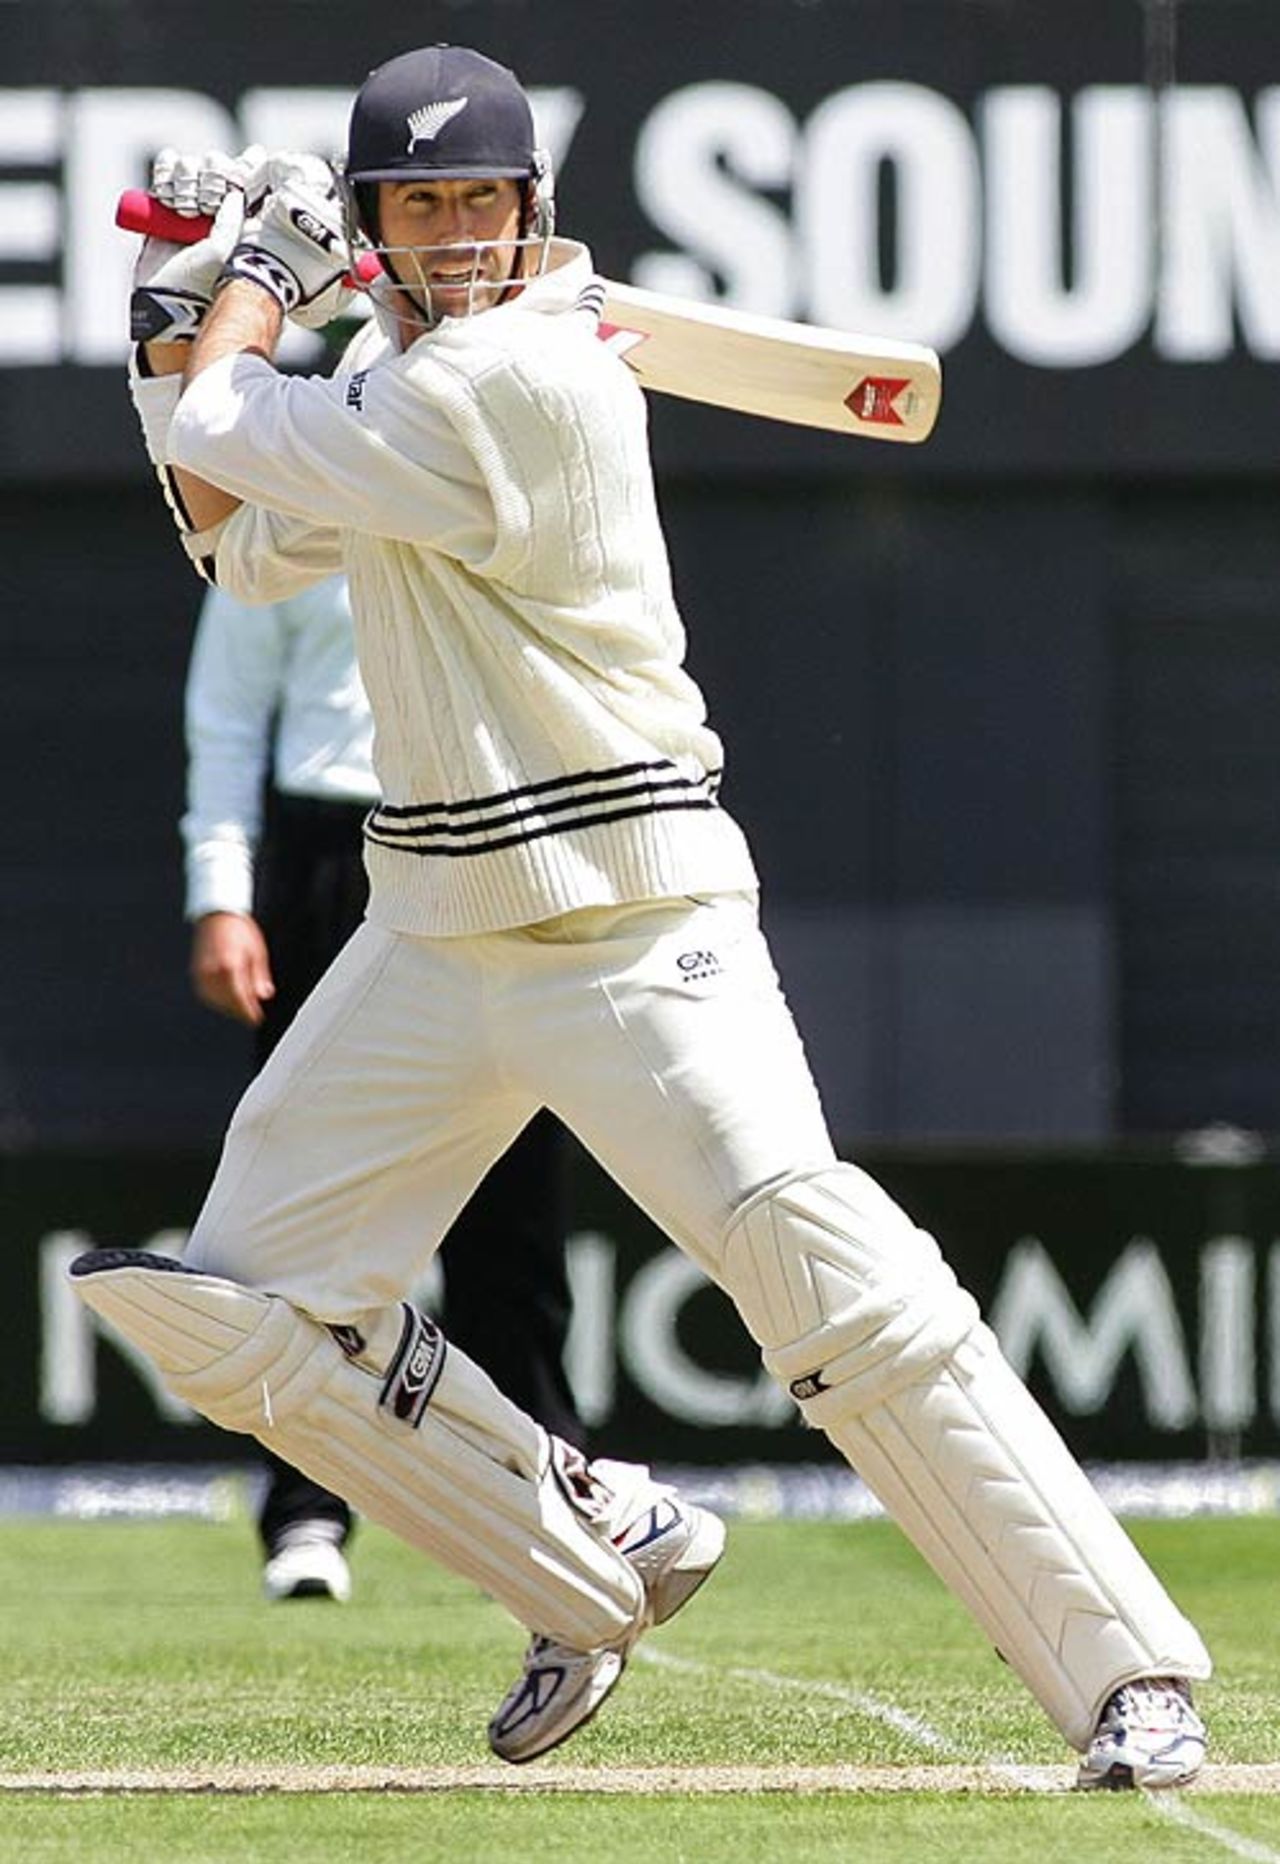 Stephen Fleming anchored the innings with a gritty 48, New Zealand v Sri Lanka, 1st Test, Christchurch, 2nd day, December 8, 2006